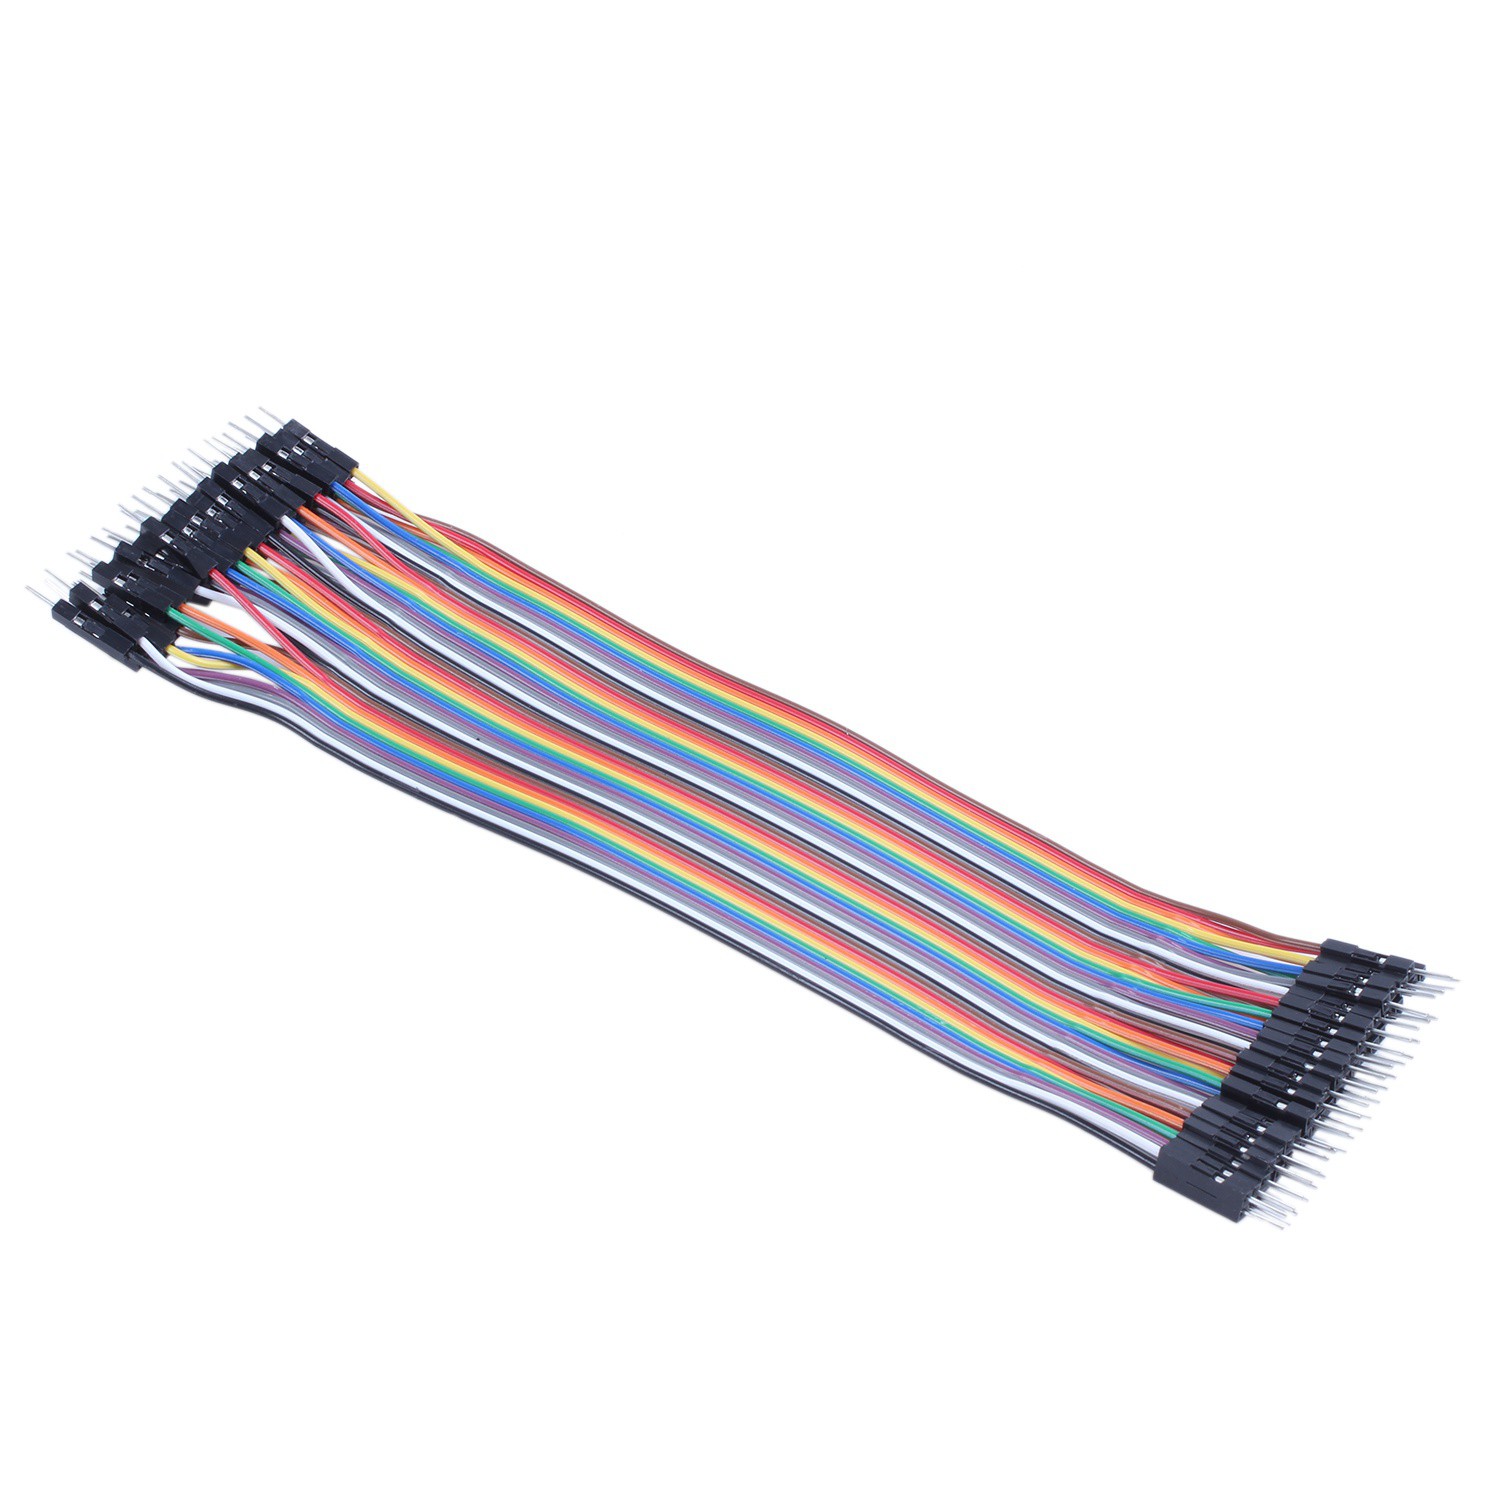 40pcs 20cm 2.54mm male to male Breadboard jumper wire cable for Arduino